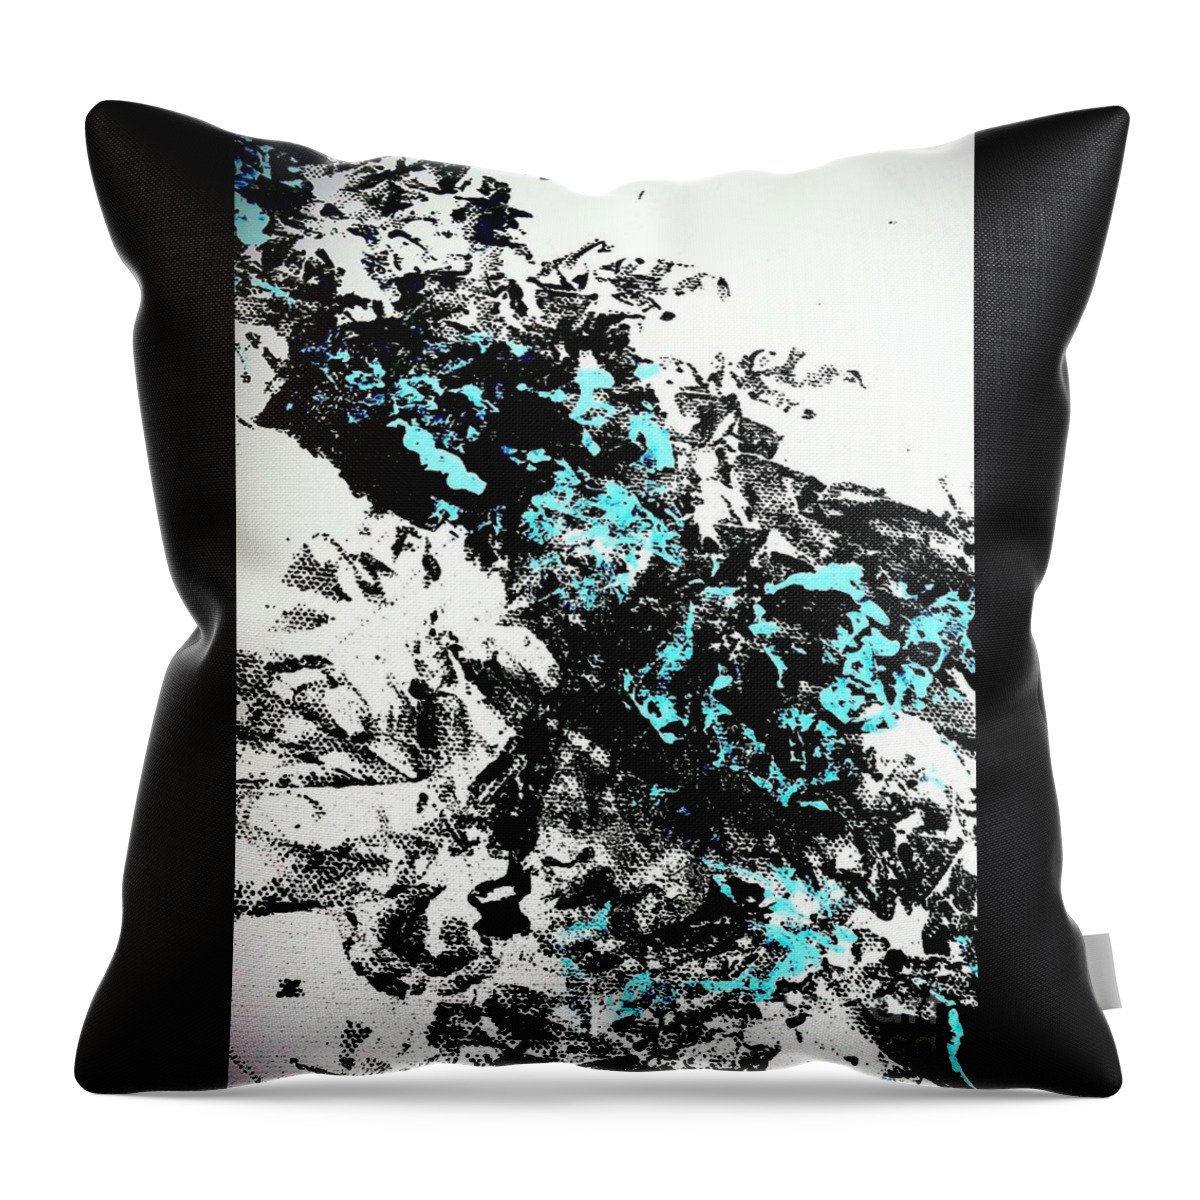 Blue Throw Pillow featuring the painting Abstract In Blue And Black by Jacqueline McReynolds